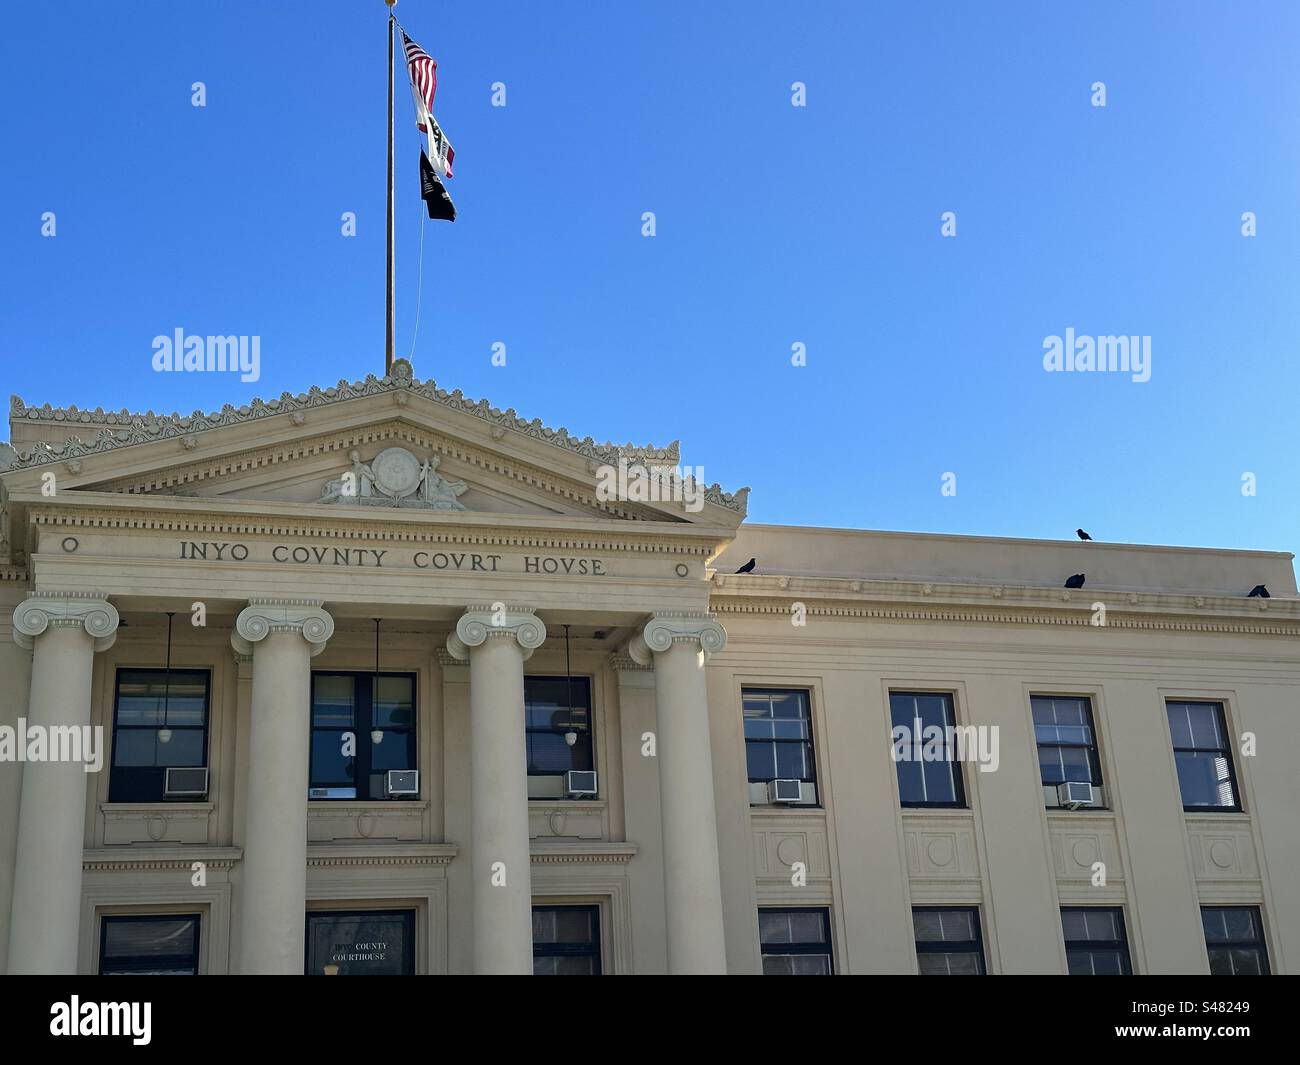 The Inyo County Courthouse in Independence, California, was built in 1922 in classical revival style. Stock Photo